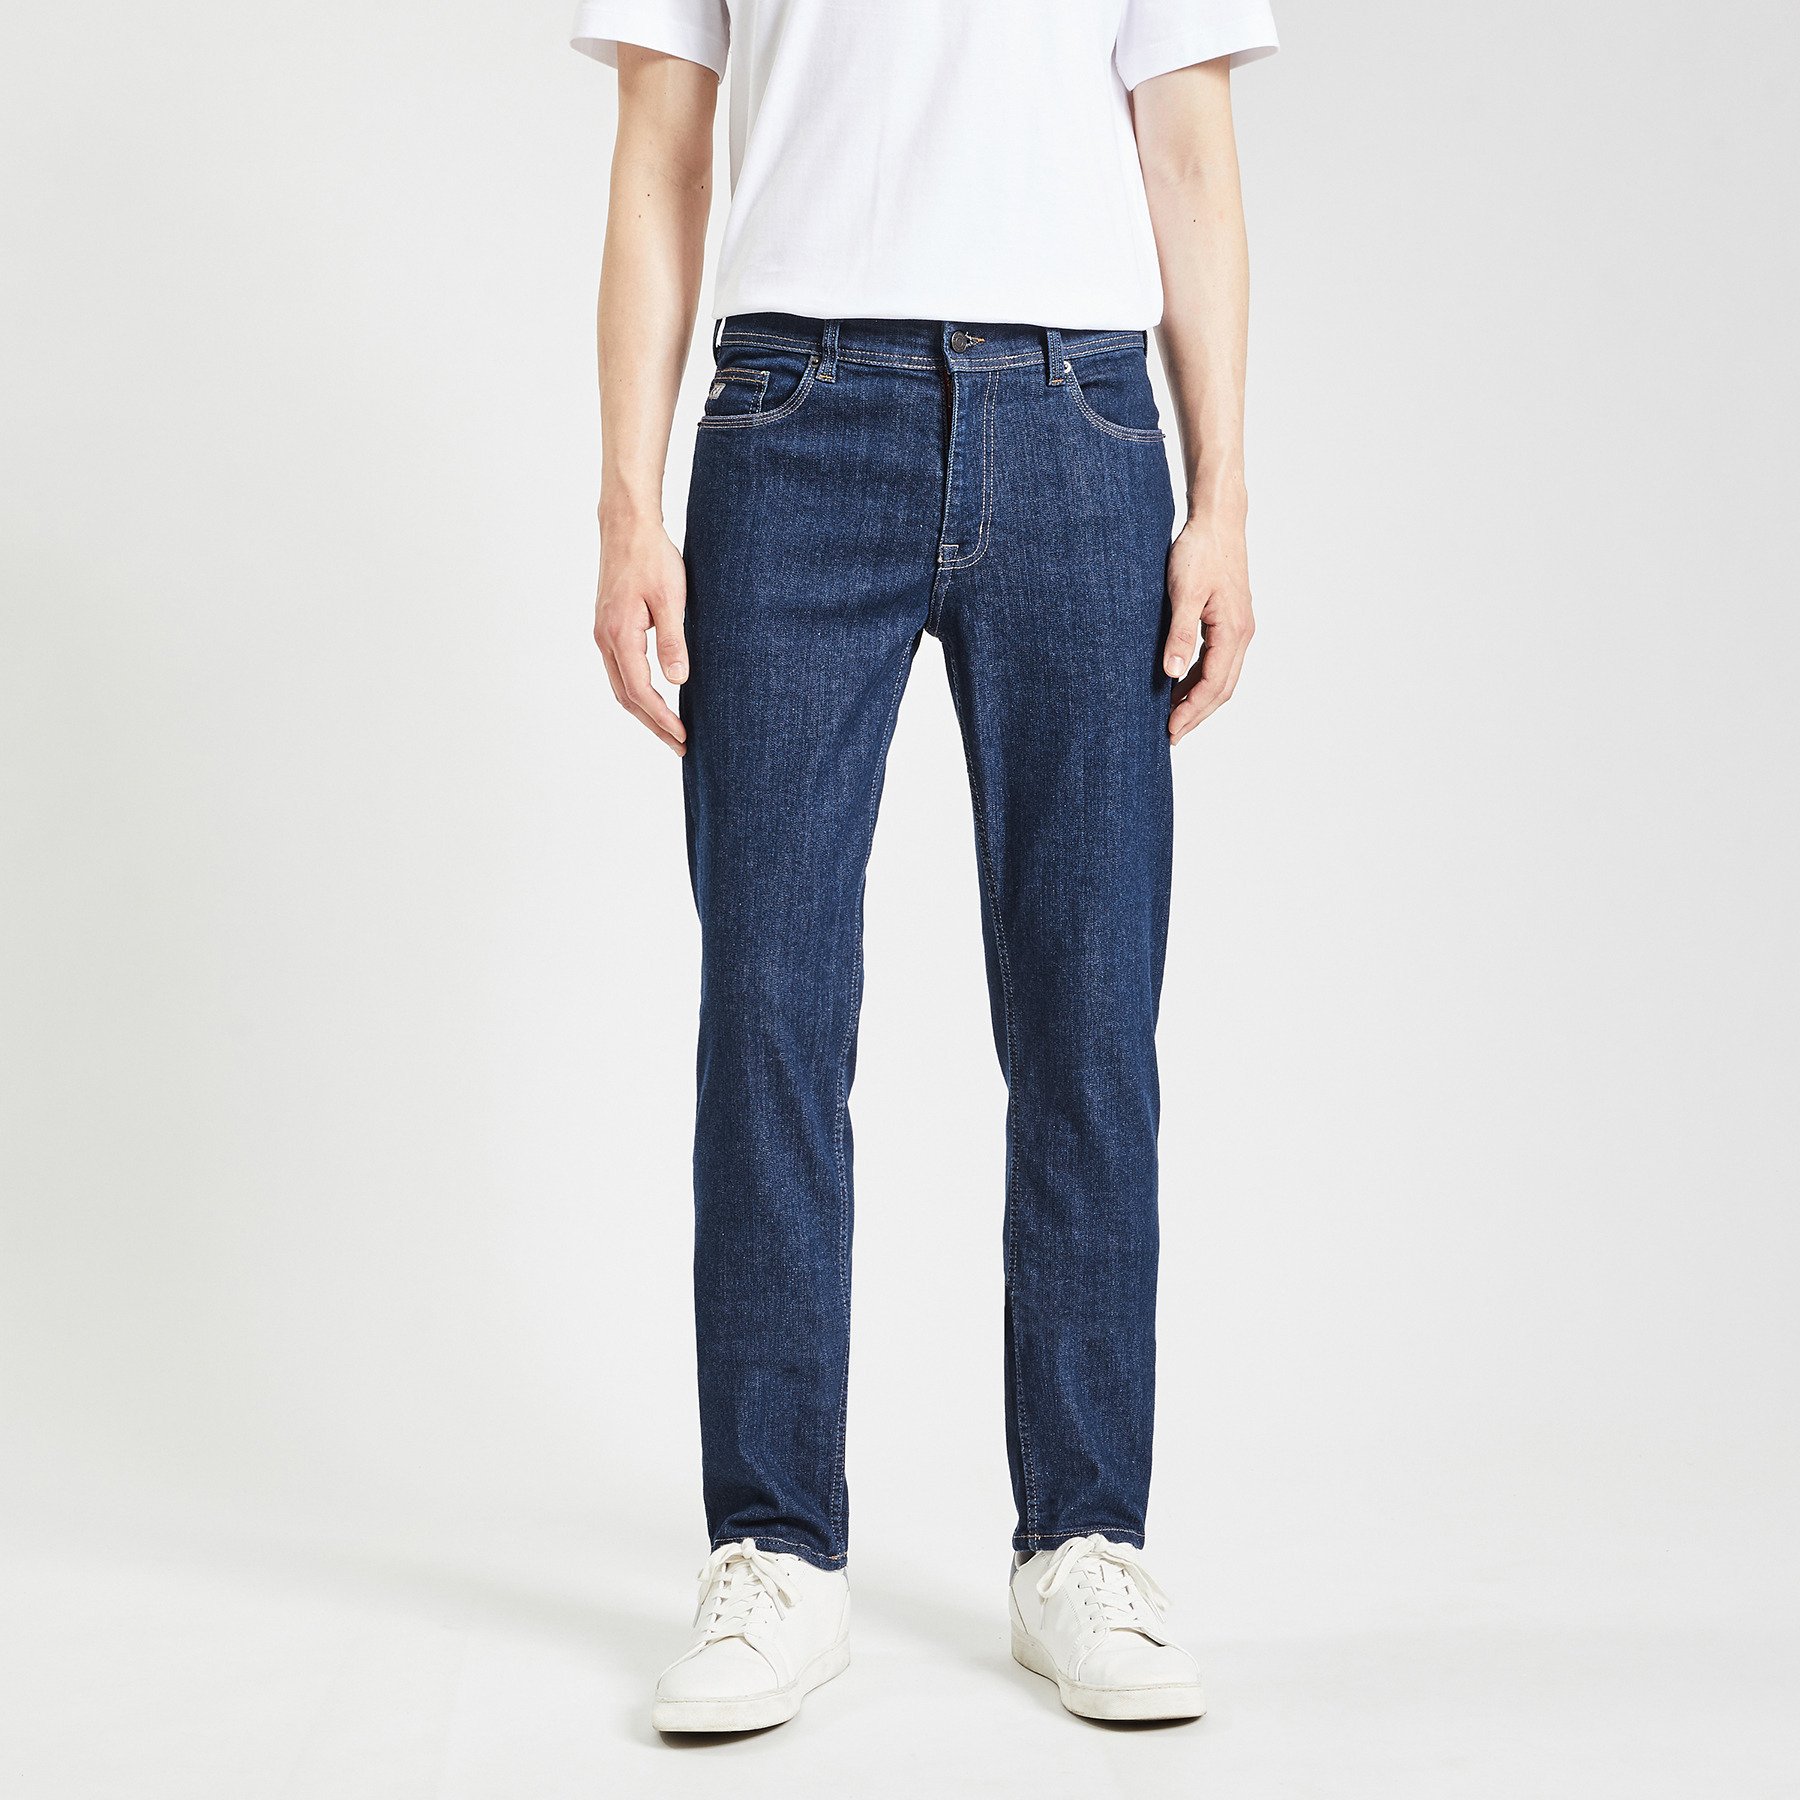 Jean straight cinq neuf édition n°2 Made in France Bleu 36 81% Coton, 17% Polyester, 2% Elasthanne Homme